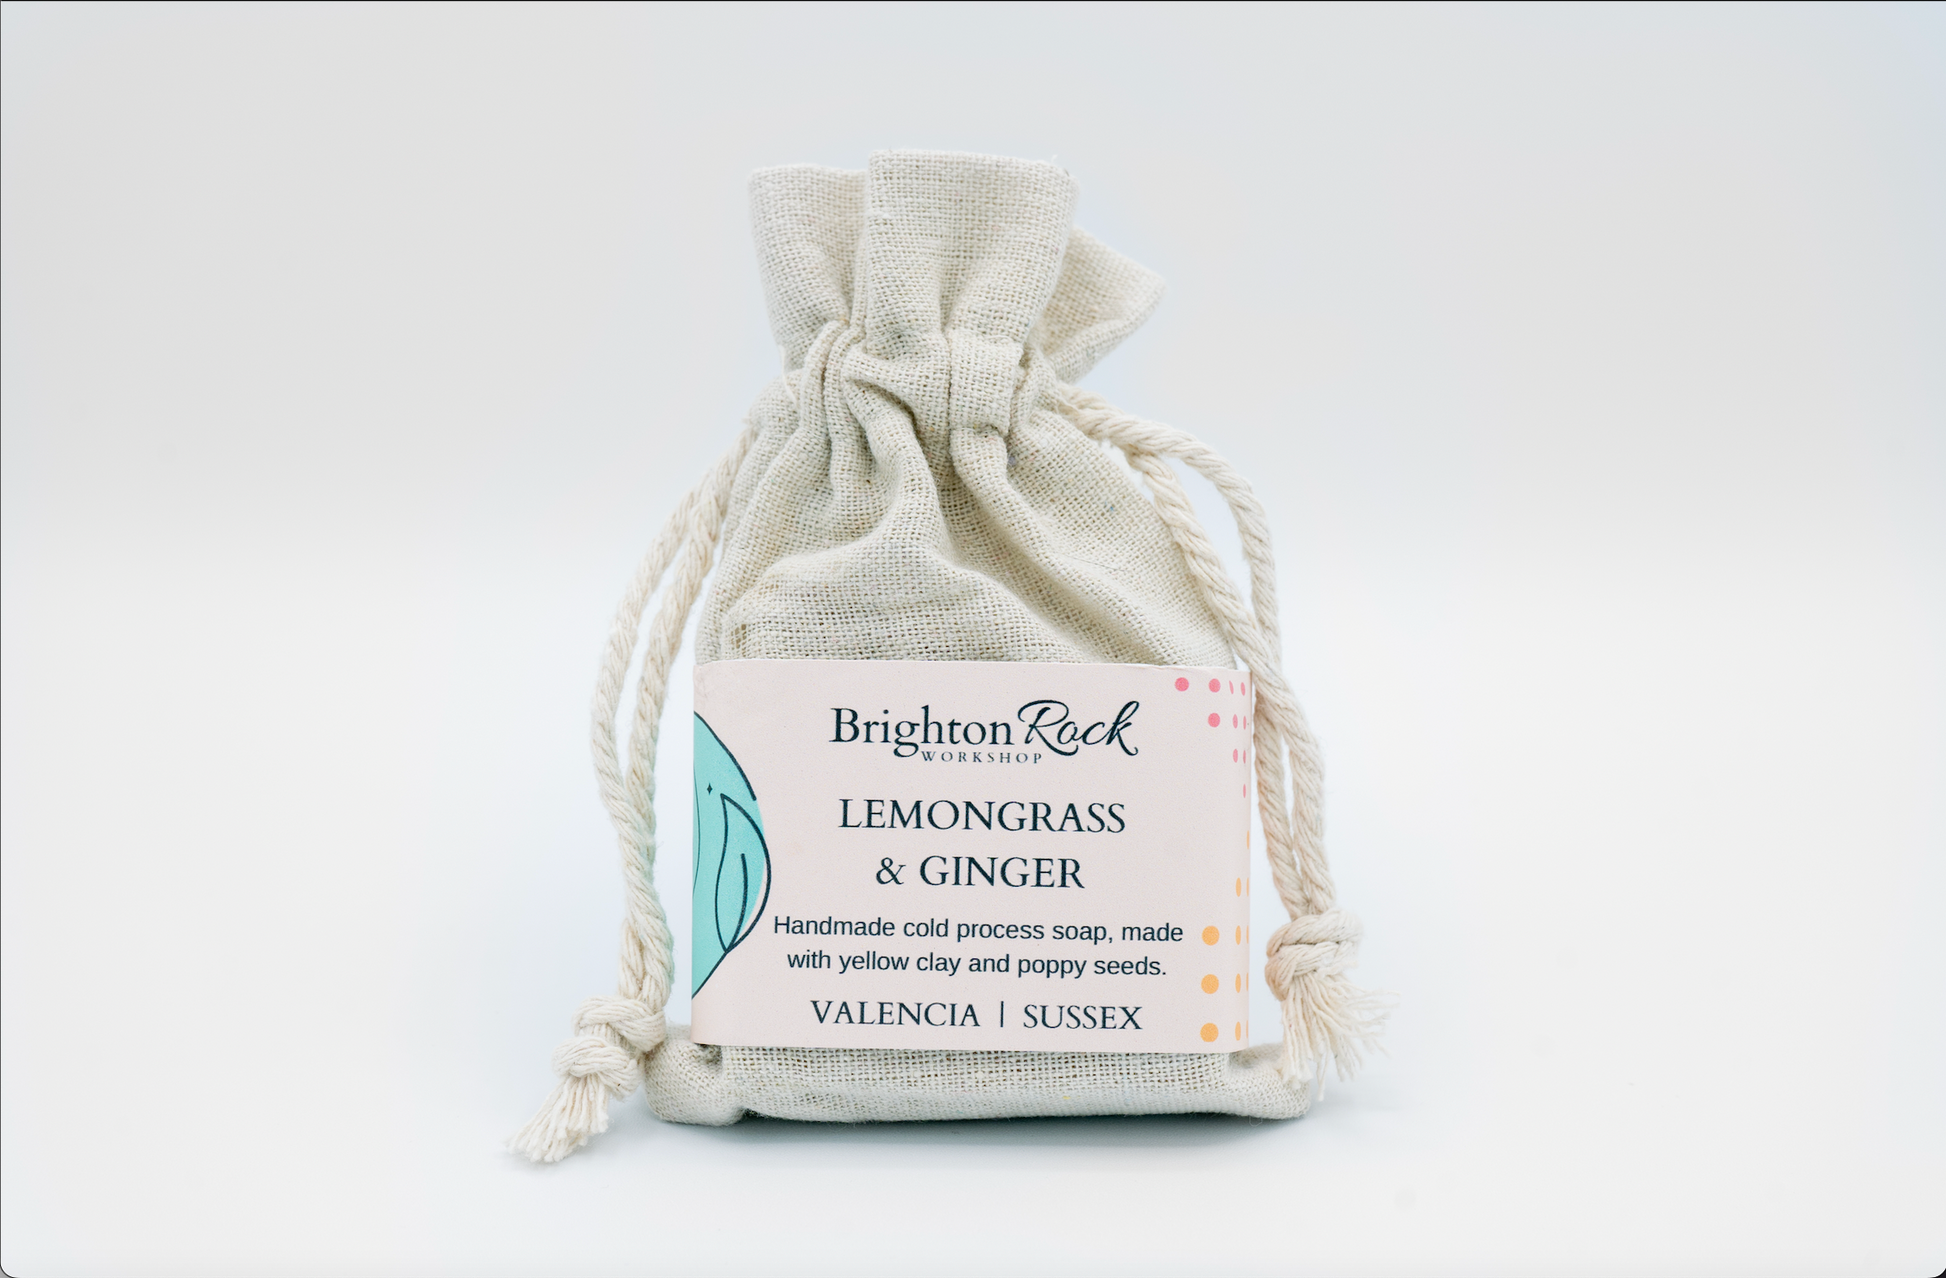 lemongrass & ginger detoxifying aromatherapy scanted natural soap in cotton drawstring bag with Brighton Rock Workshop label. Handmade in Spain. Made with natural skin-loving ingredients. Olive oil, shea butter, coconut oil, cocoa butter, rose clay and botanical ingredients. eco friendly and sustainable